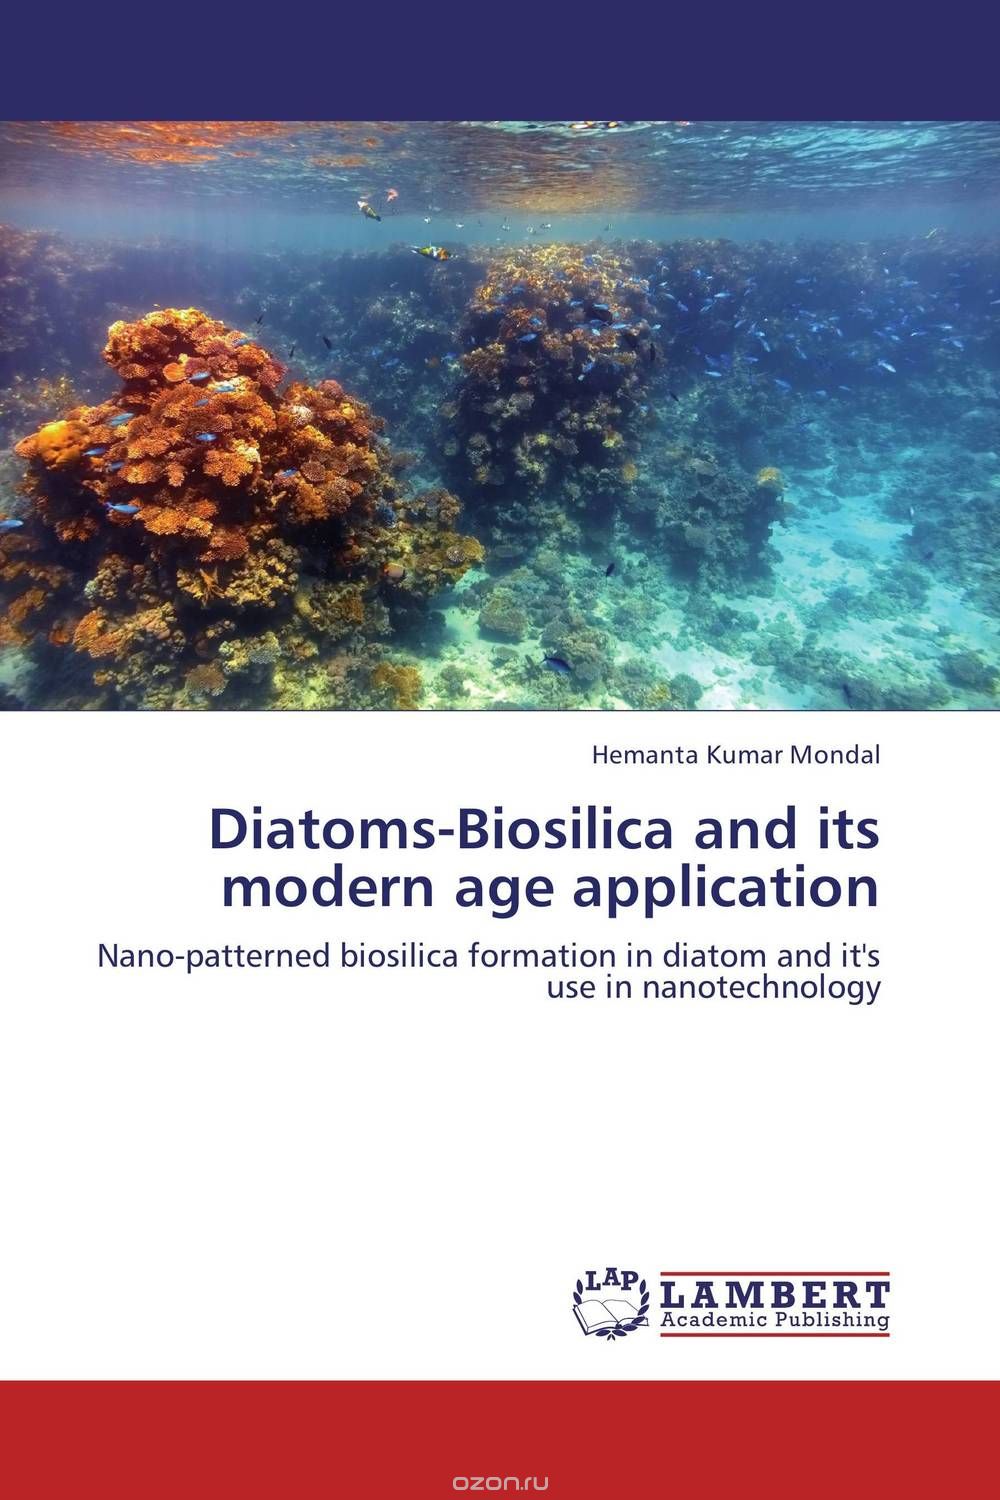 Diatoms-Biosilica and its modern age application